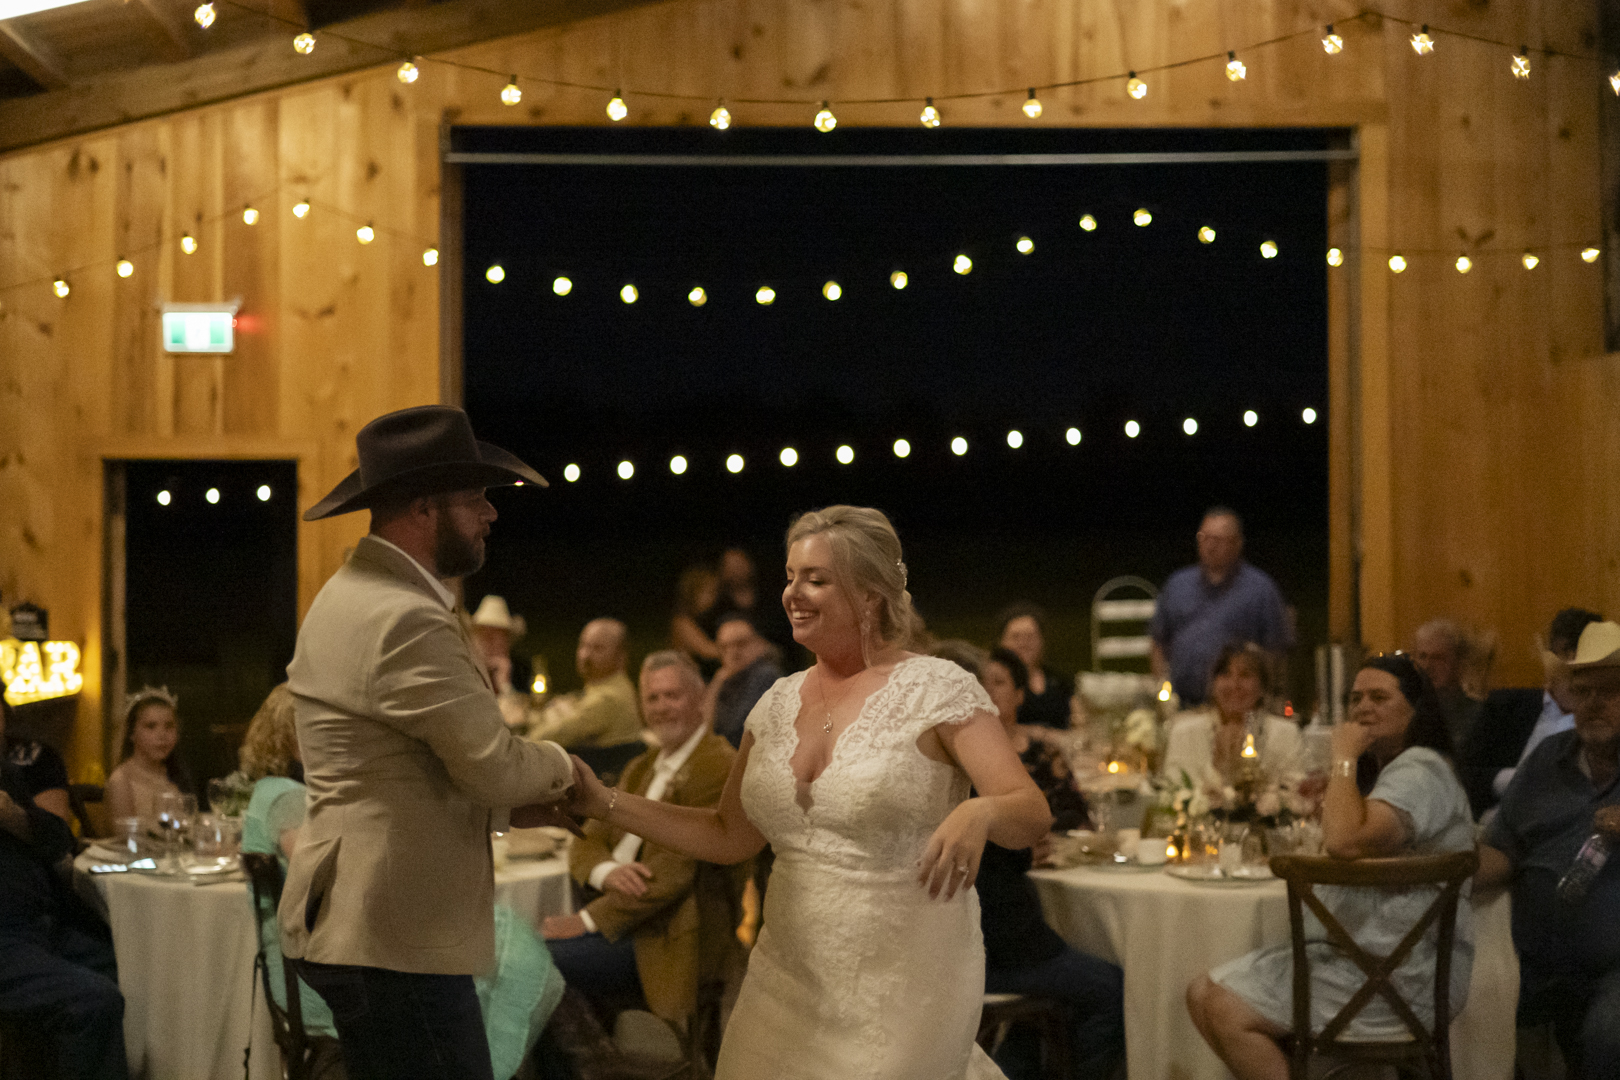 First dance in the barn